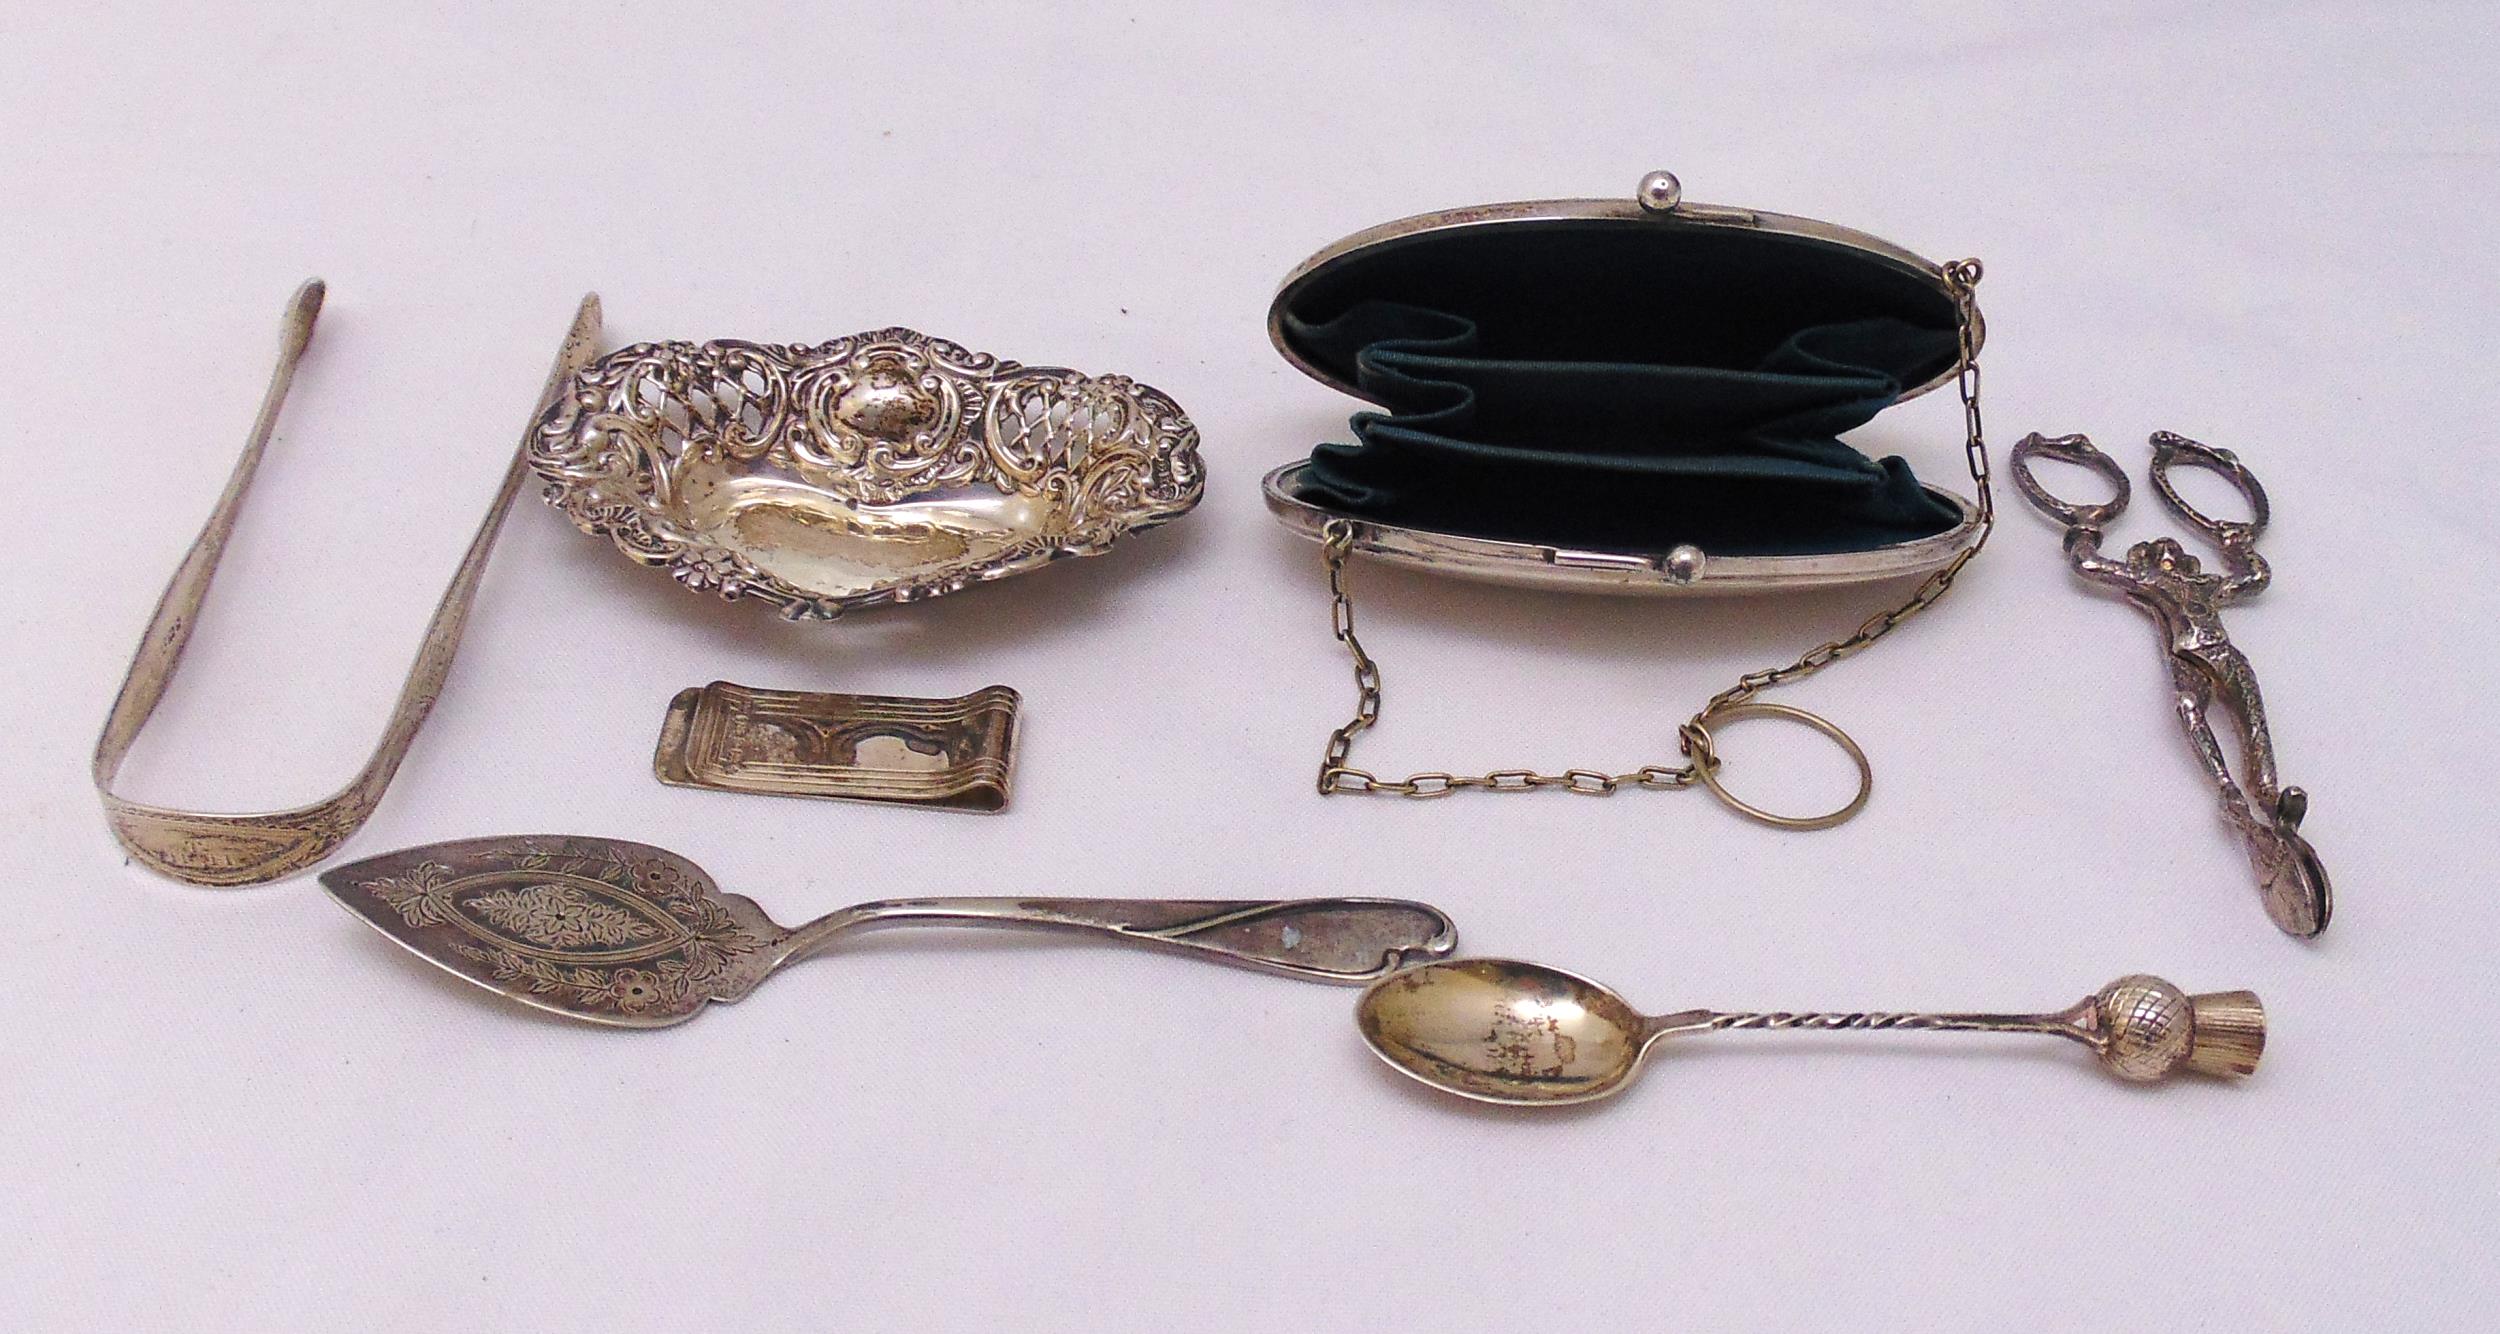 A quantity of hallmarked silver and white metal to include a purse, tongs, bonbon dish, money